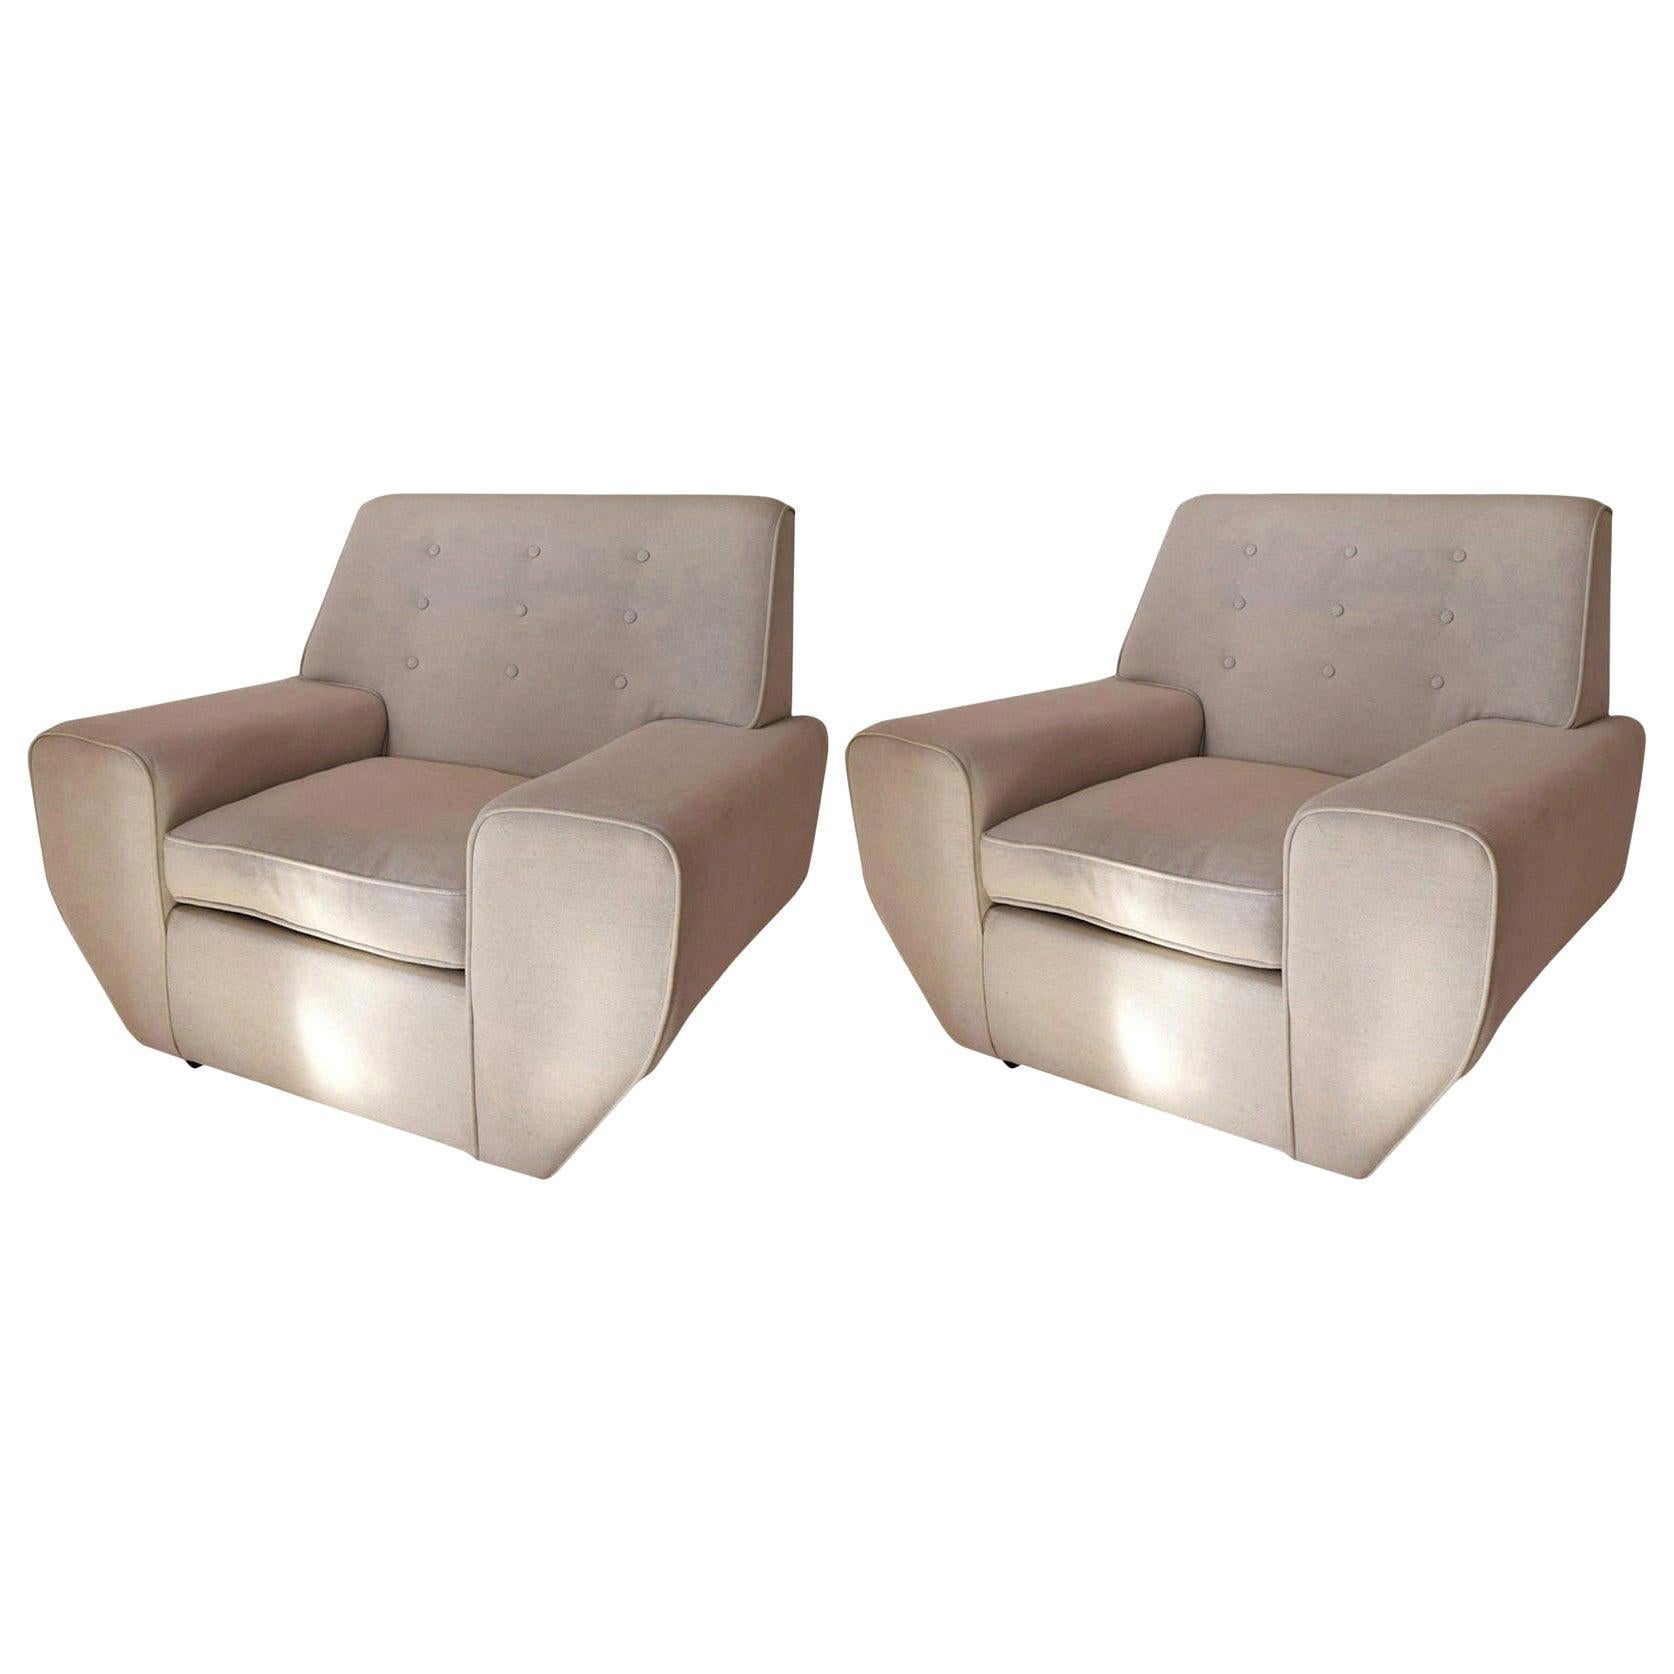 Pair of Geometric Cream Linen Upholstered Midcentury Lounge Chairs For Sale